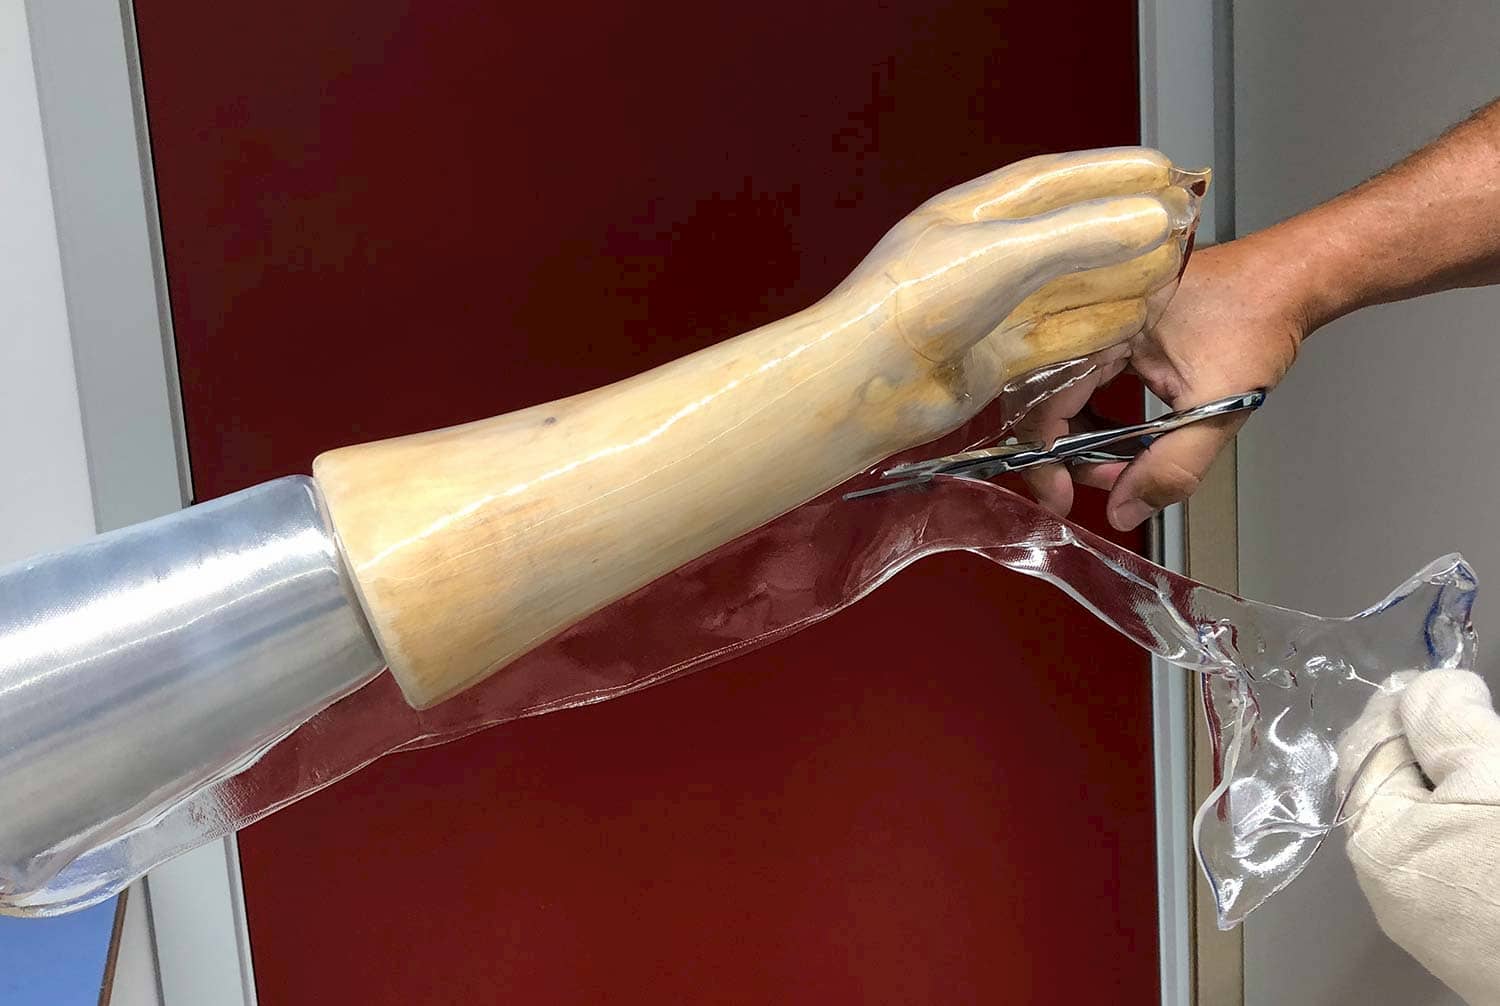 Trimming excess material of a high-temperature orthosis